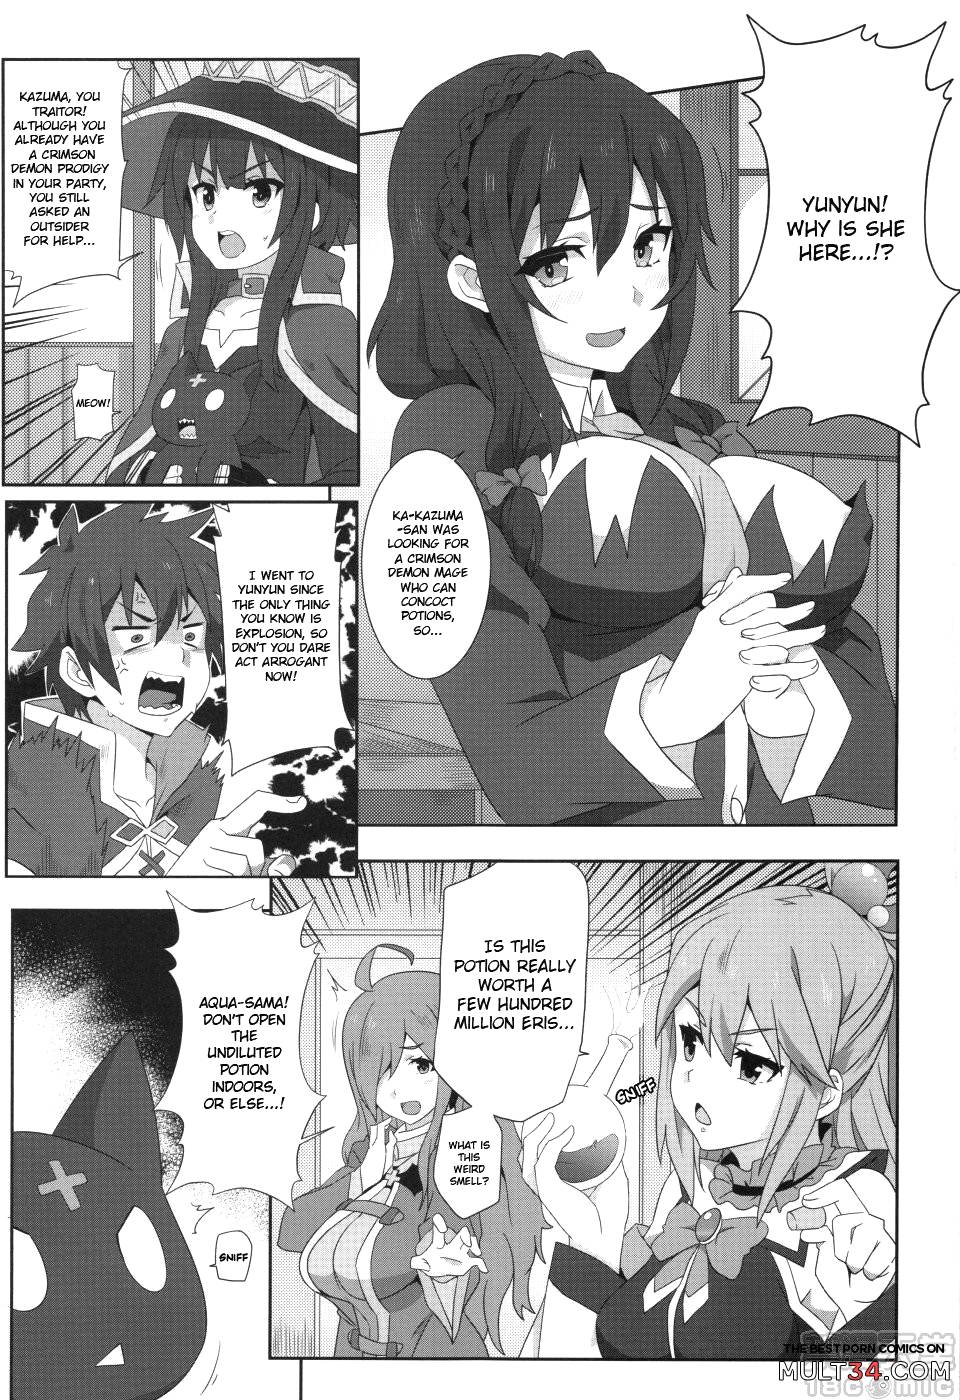 Blessing Megumin with a Magnificence Explosion! 2 page 5